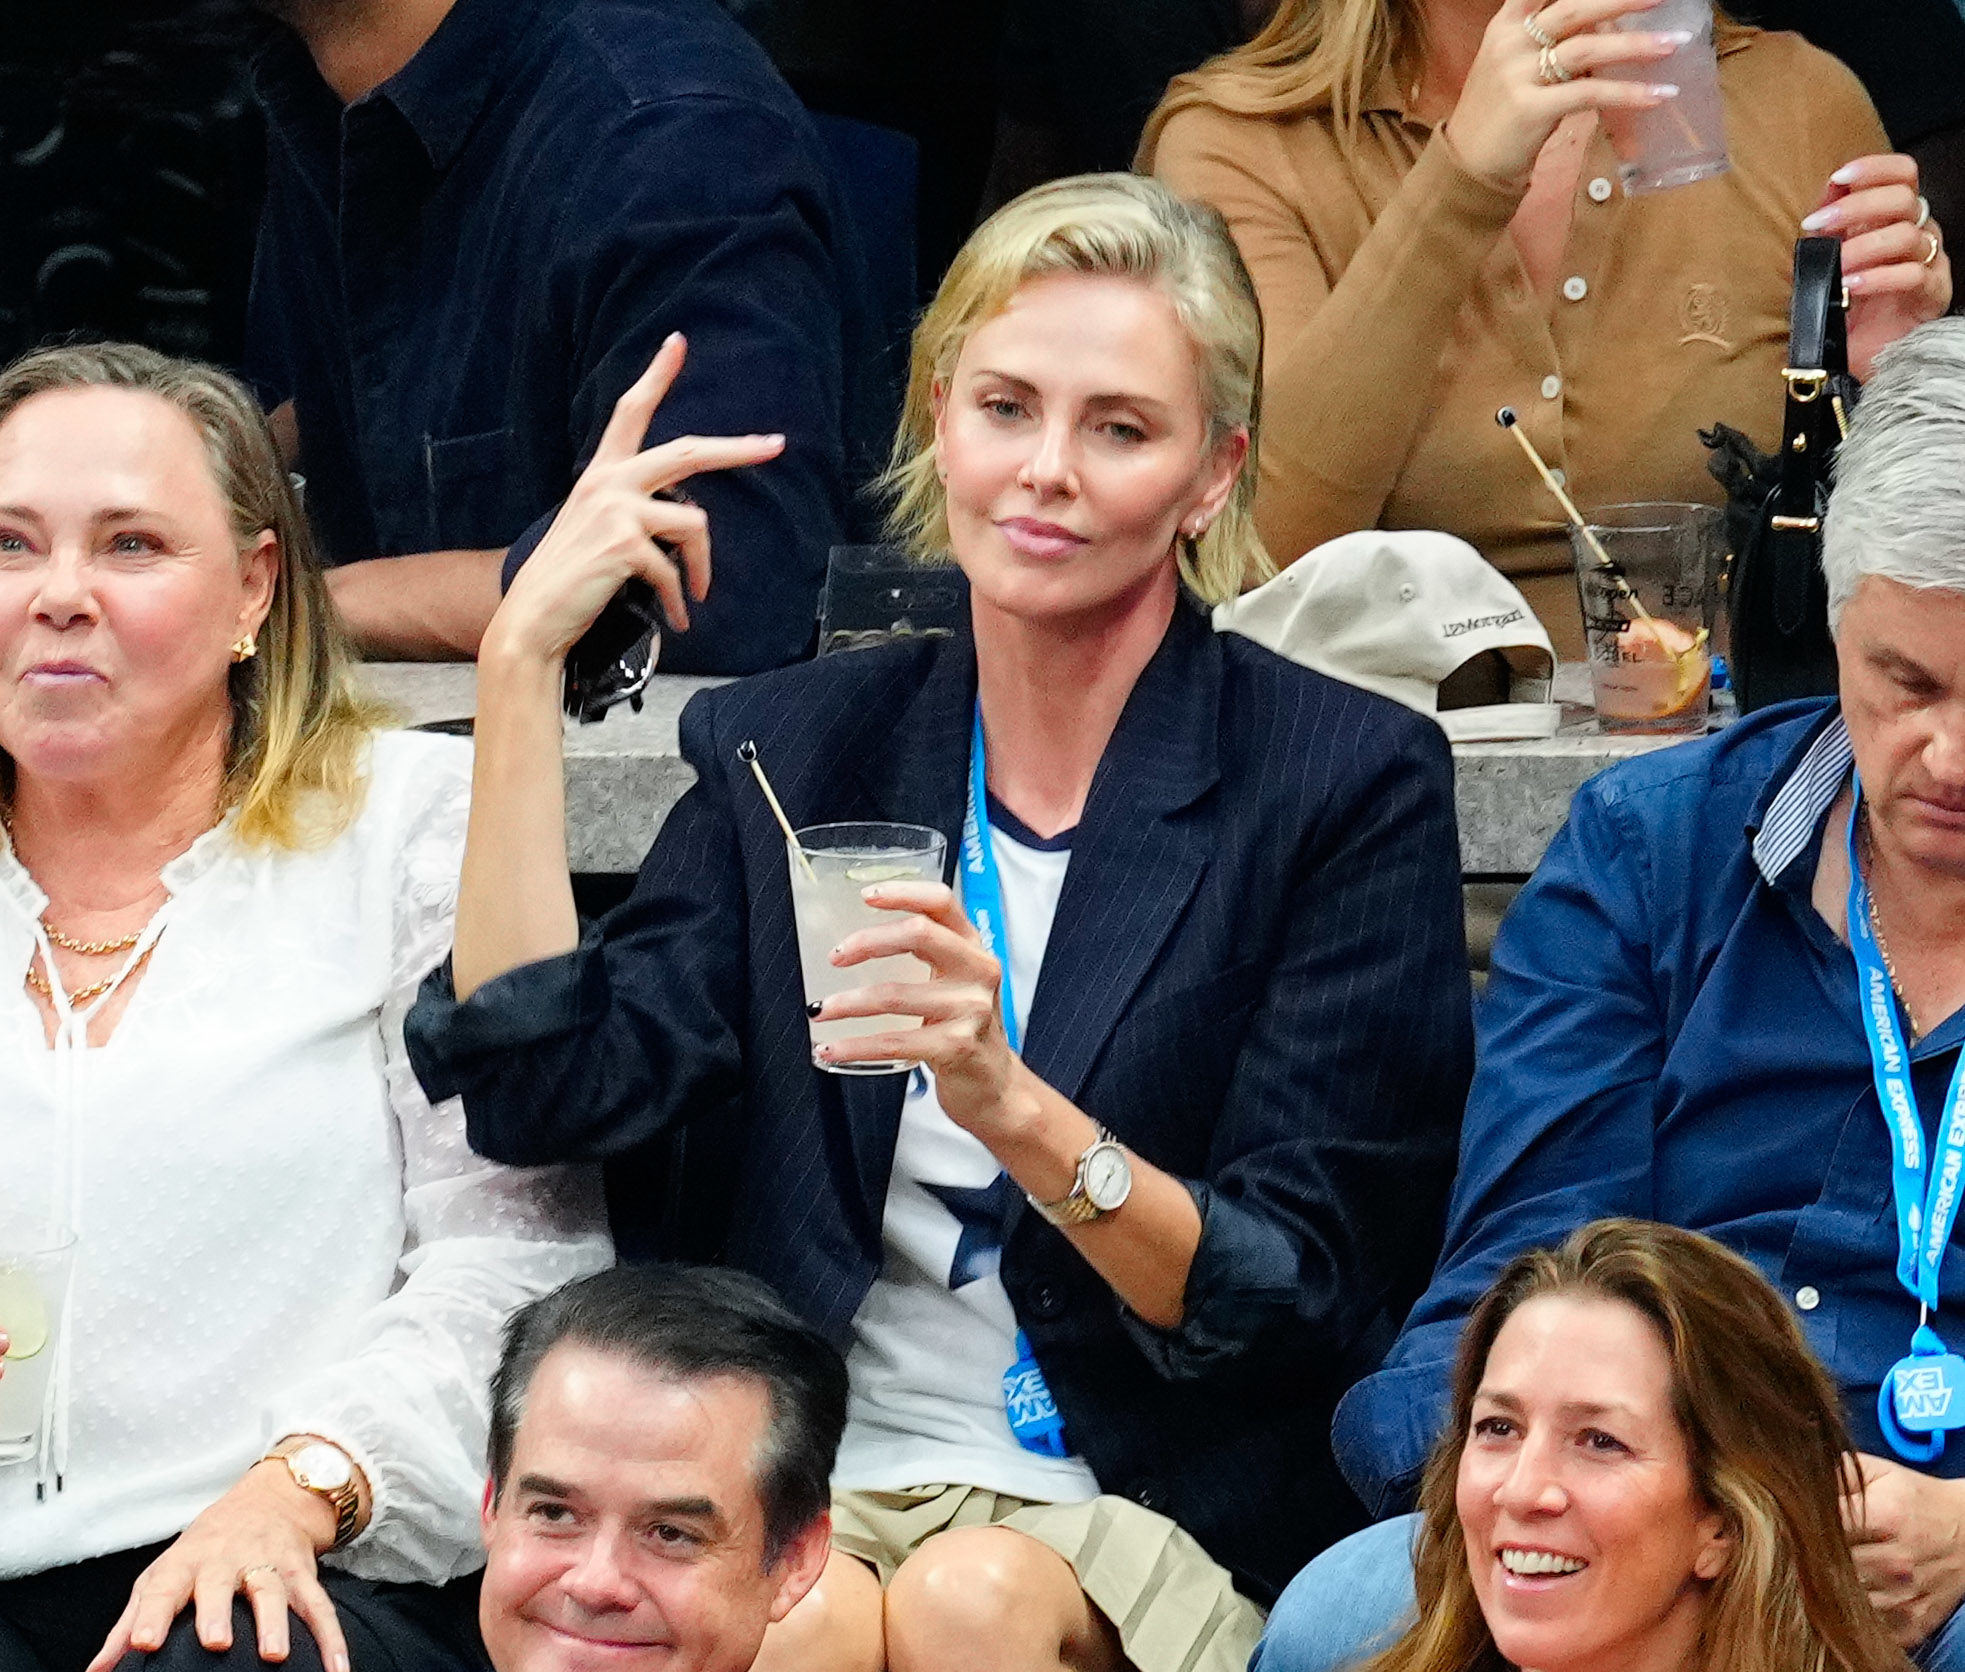 Charlize Theron holding a drink and holding up a peace sign